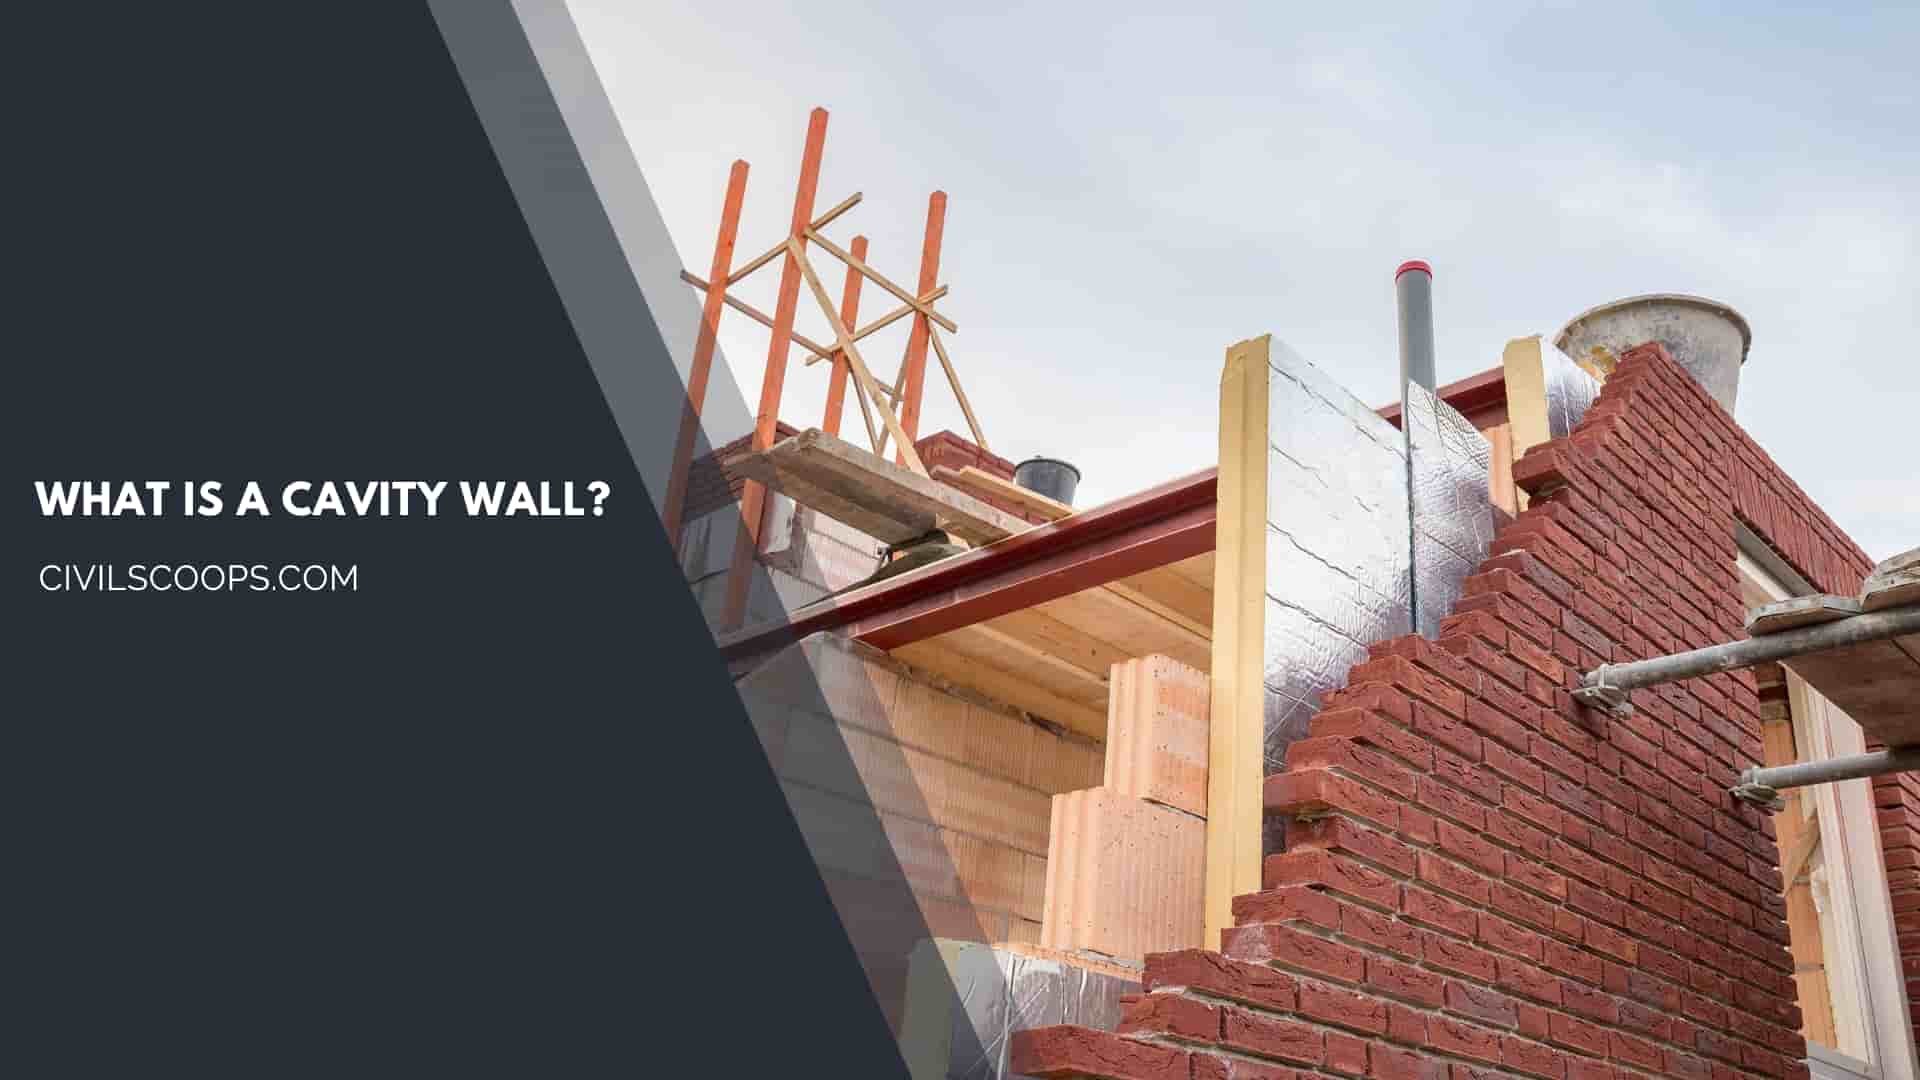 What Is a Cavity Wall?